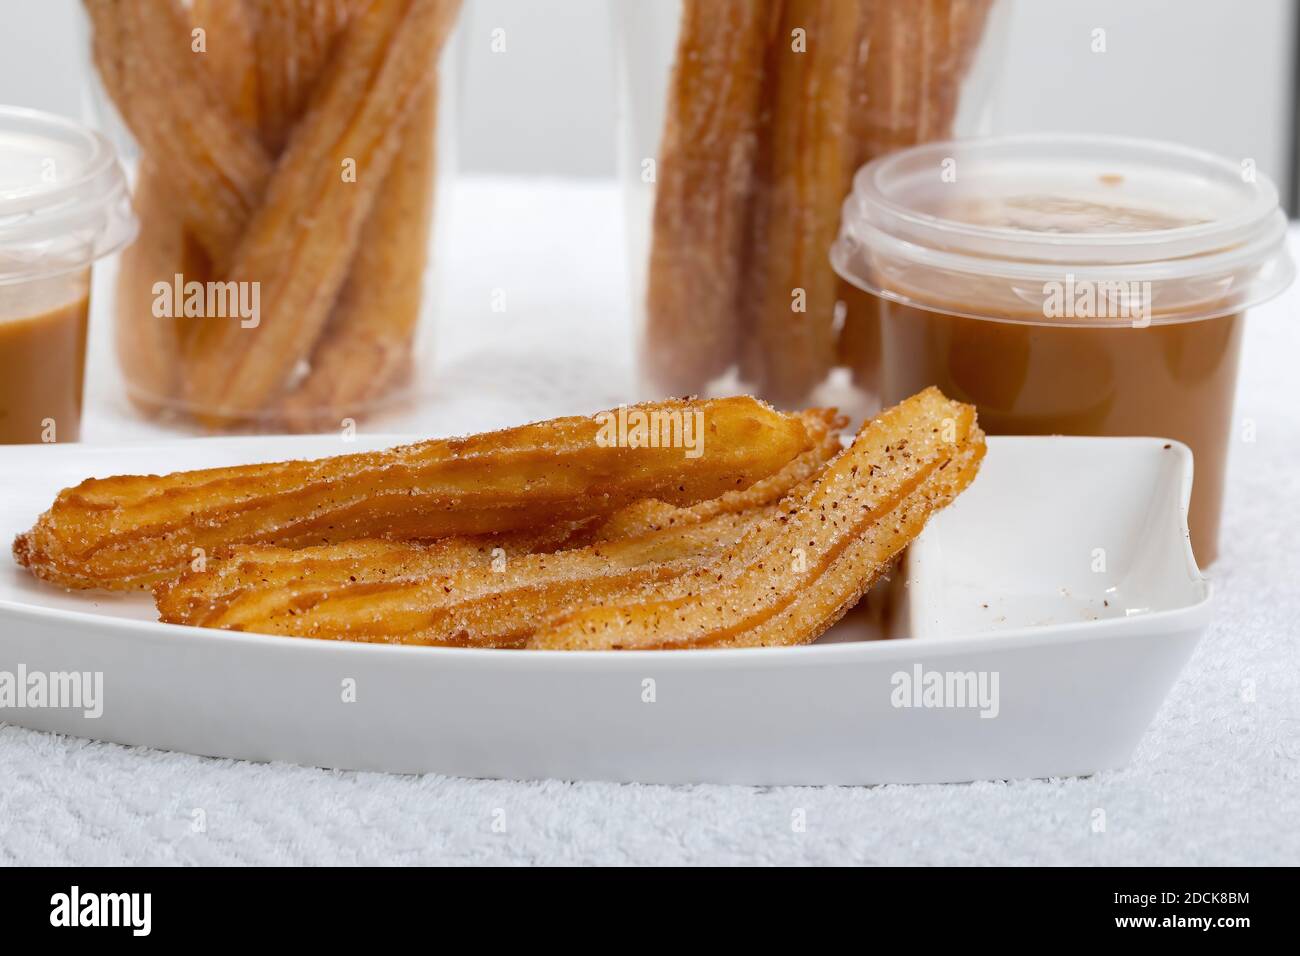 Fried Churros sweets with sugar on white background Stock Photo